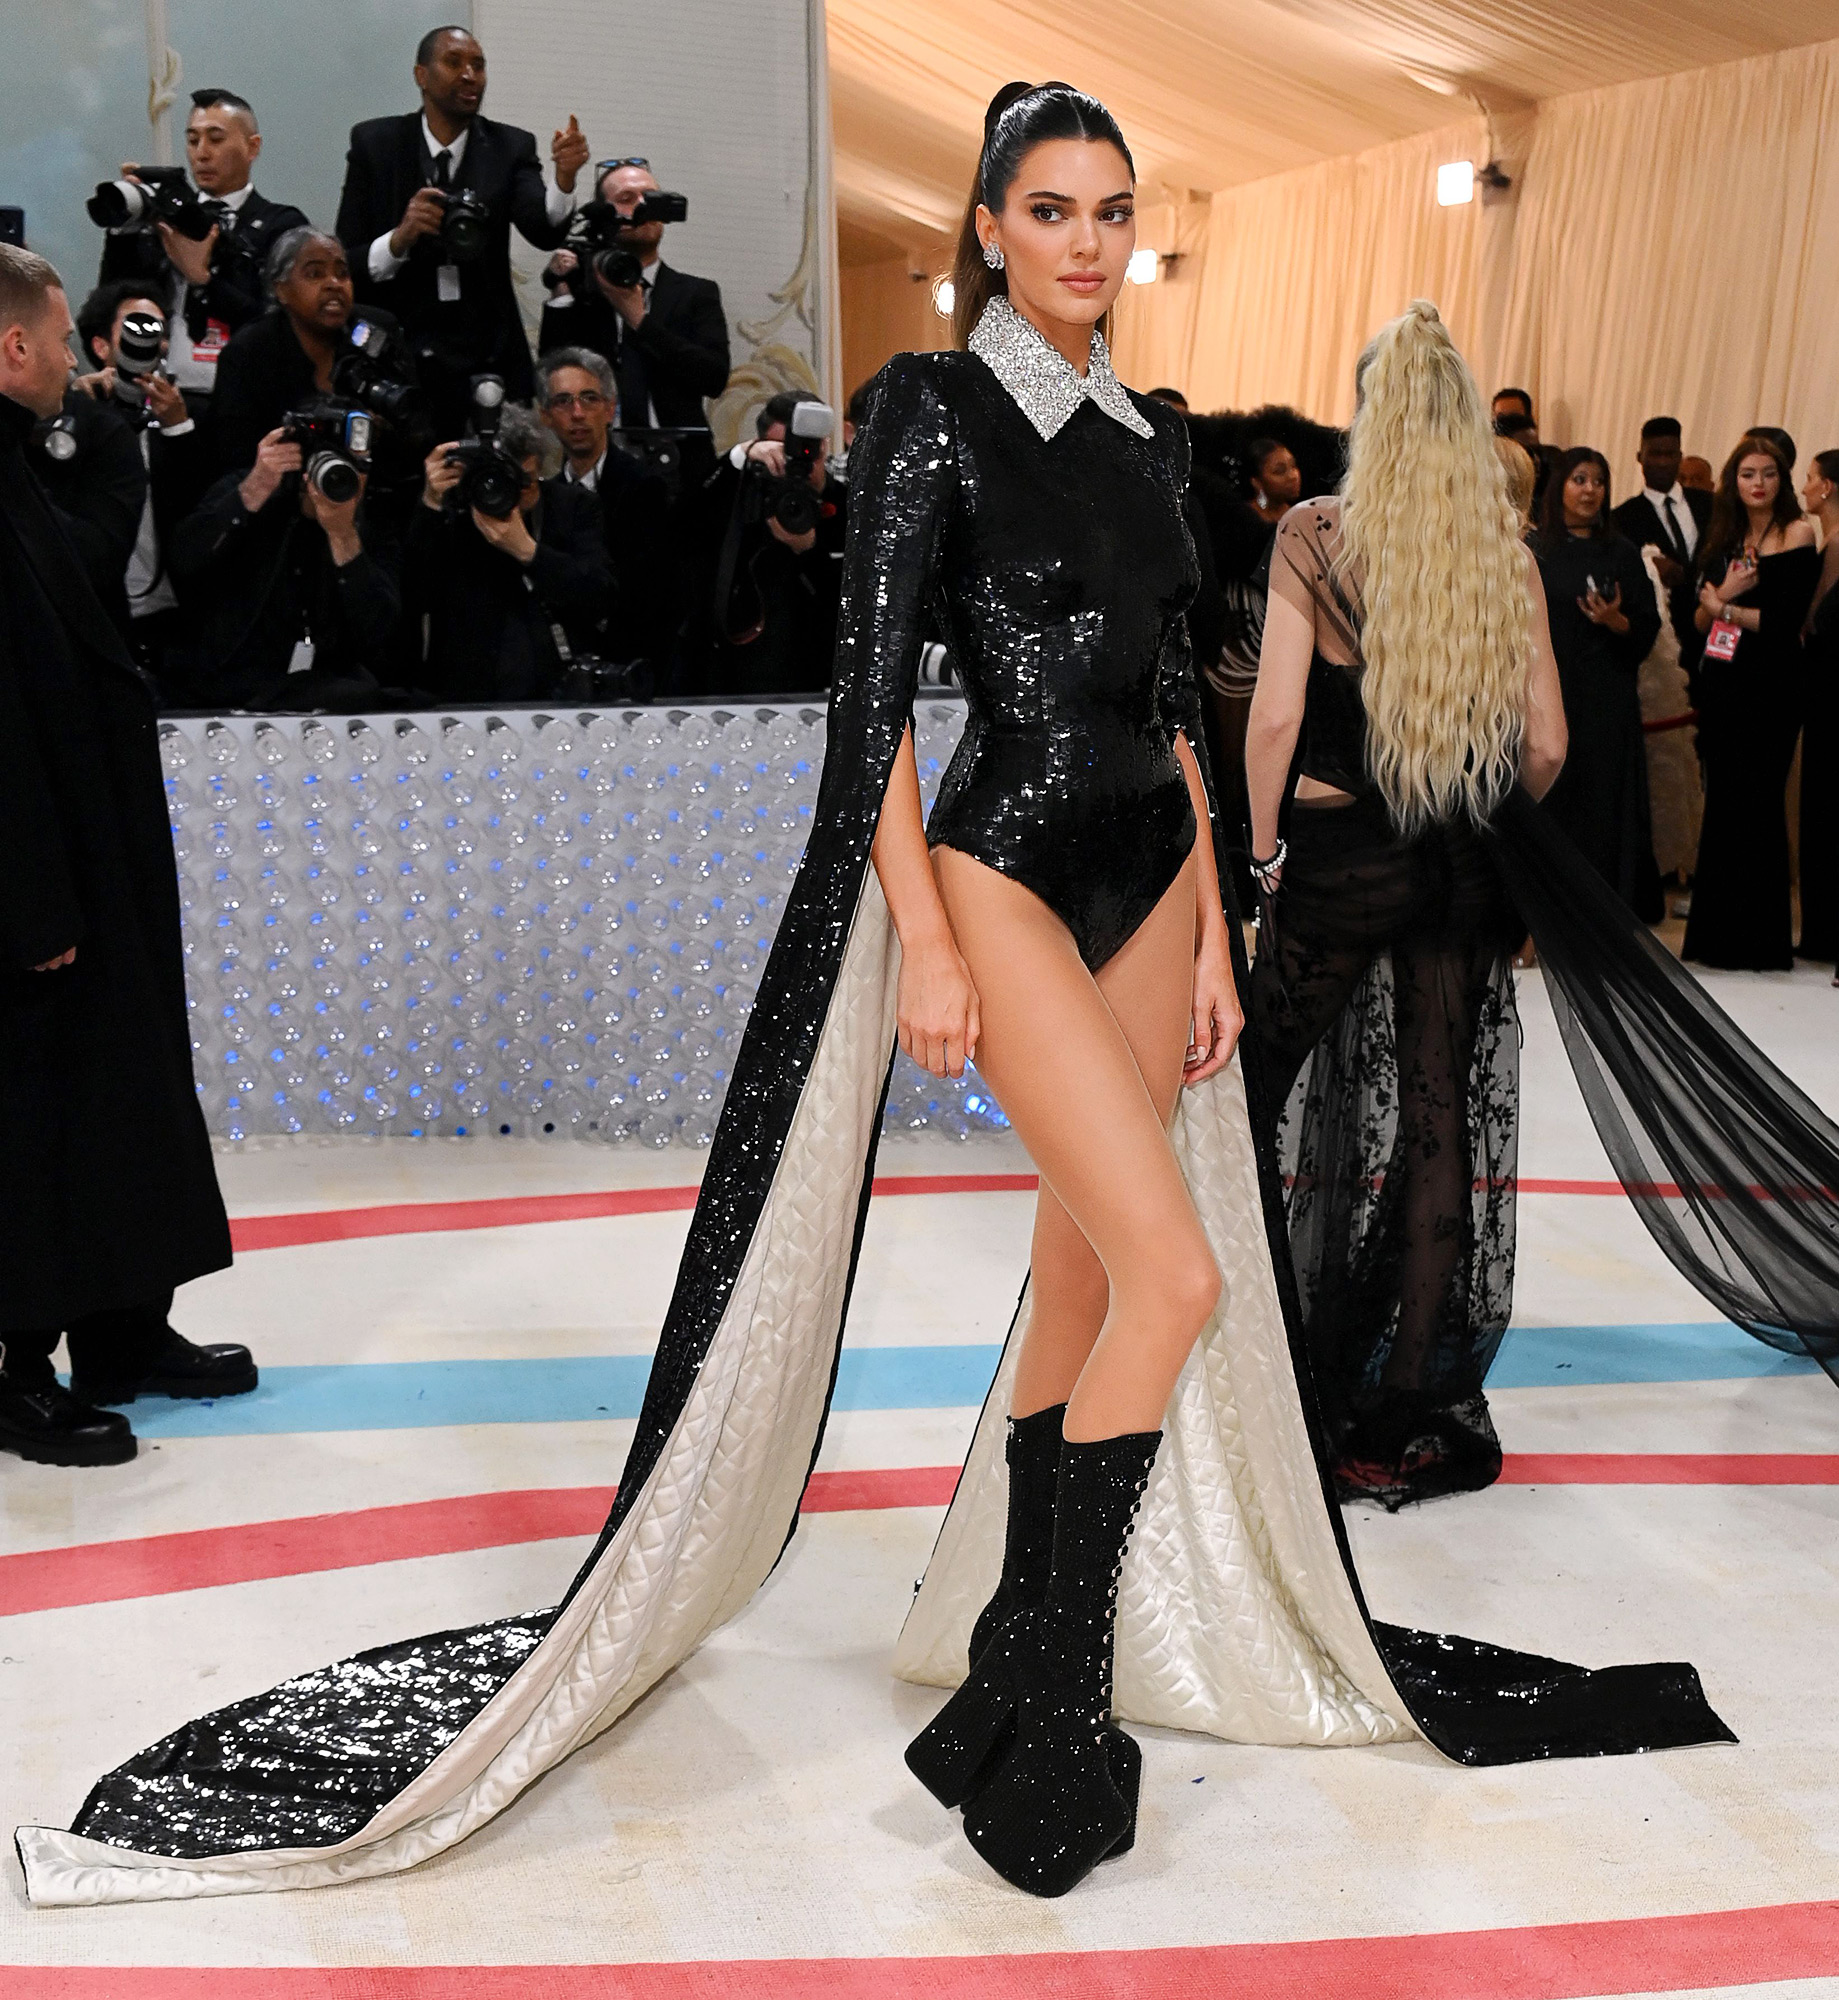 Met Gala 2022 Red Carpet Gallery: Best Looks from the Arrivals